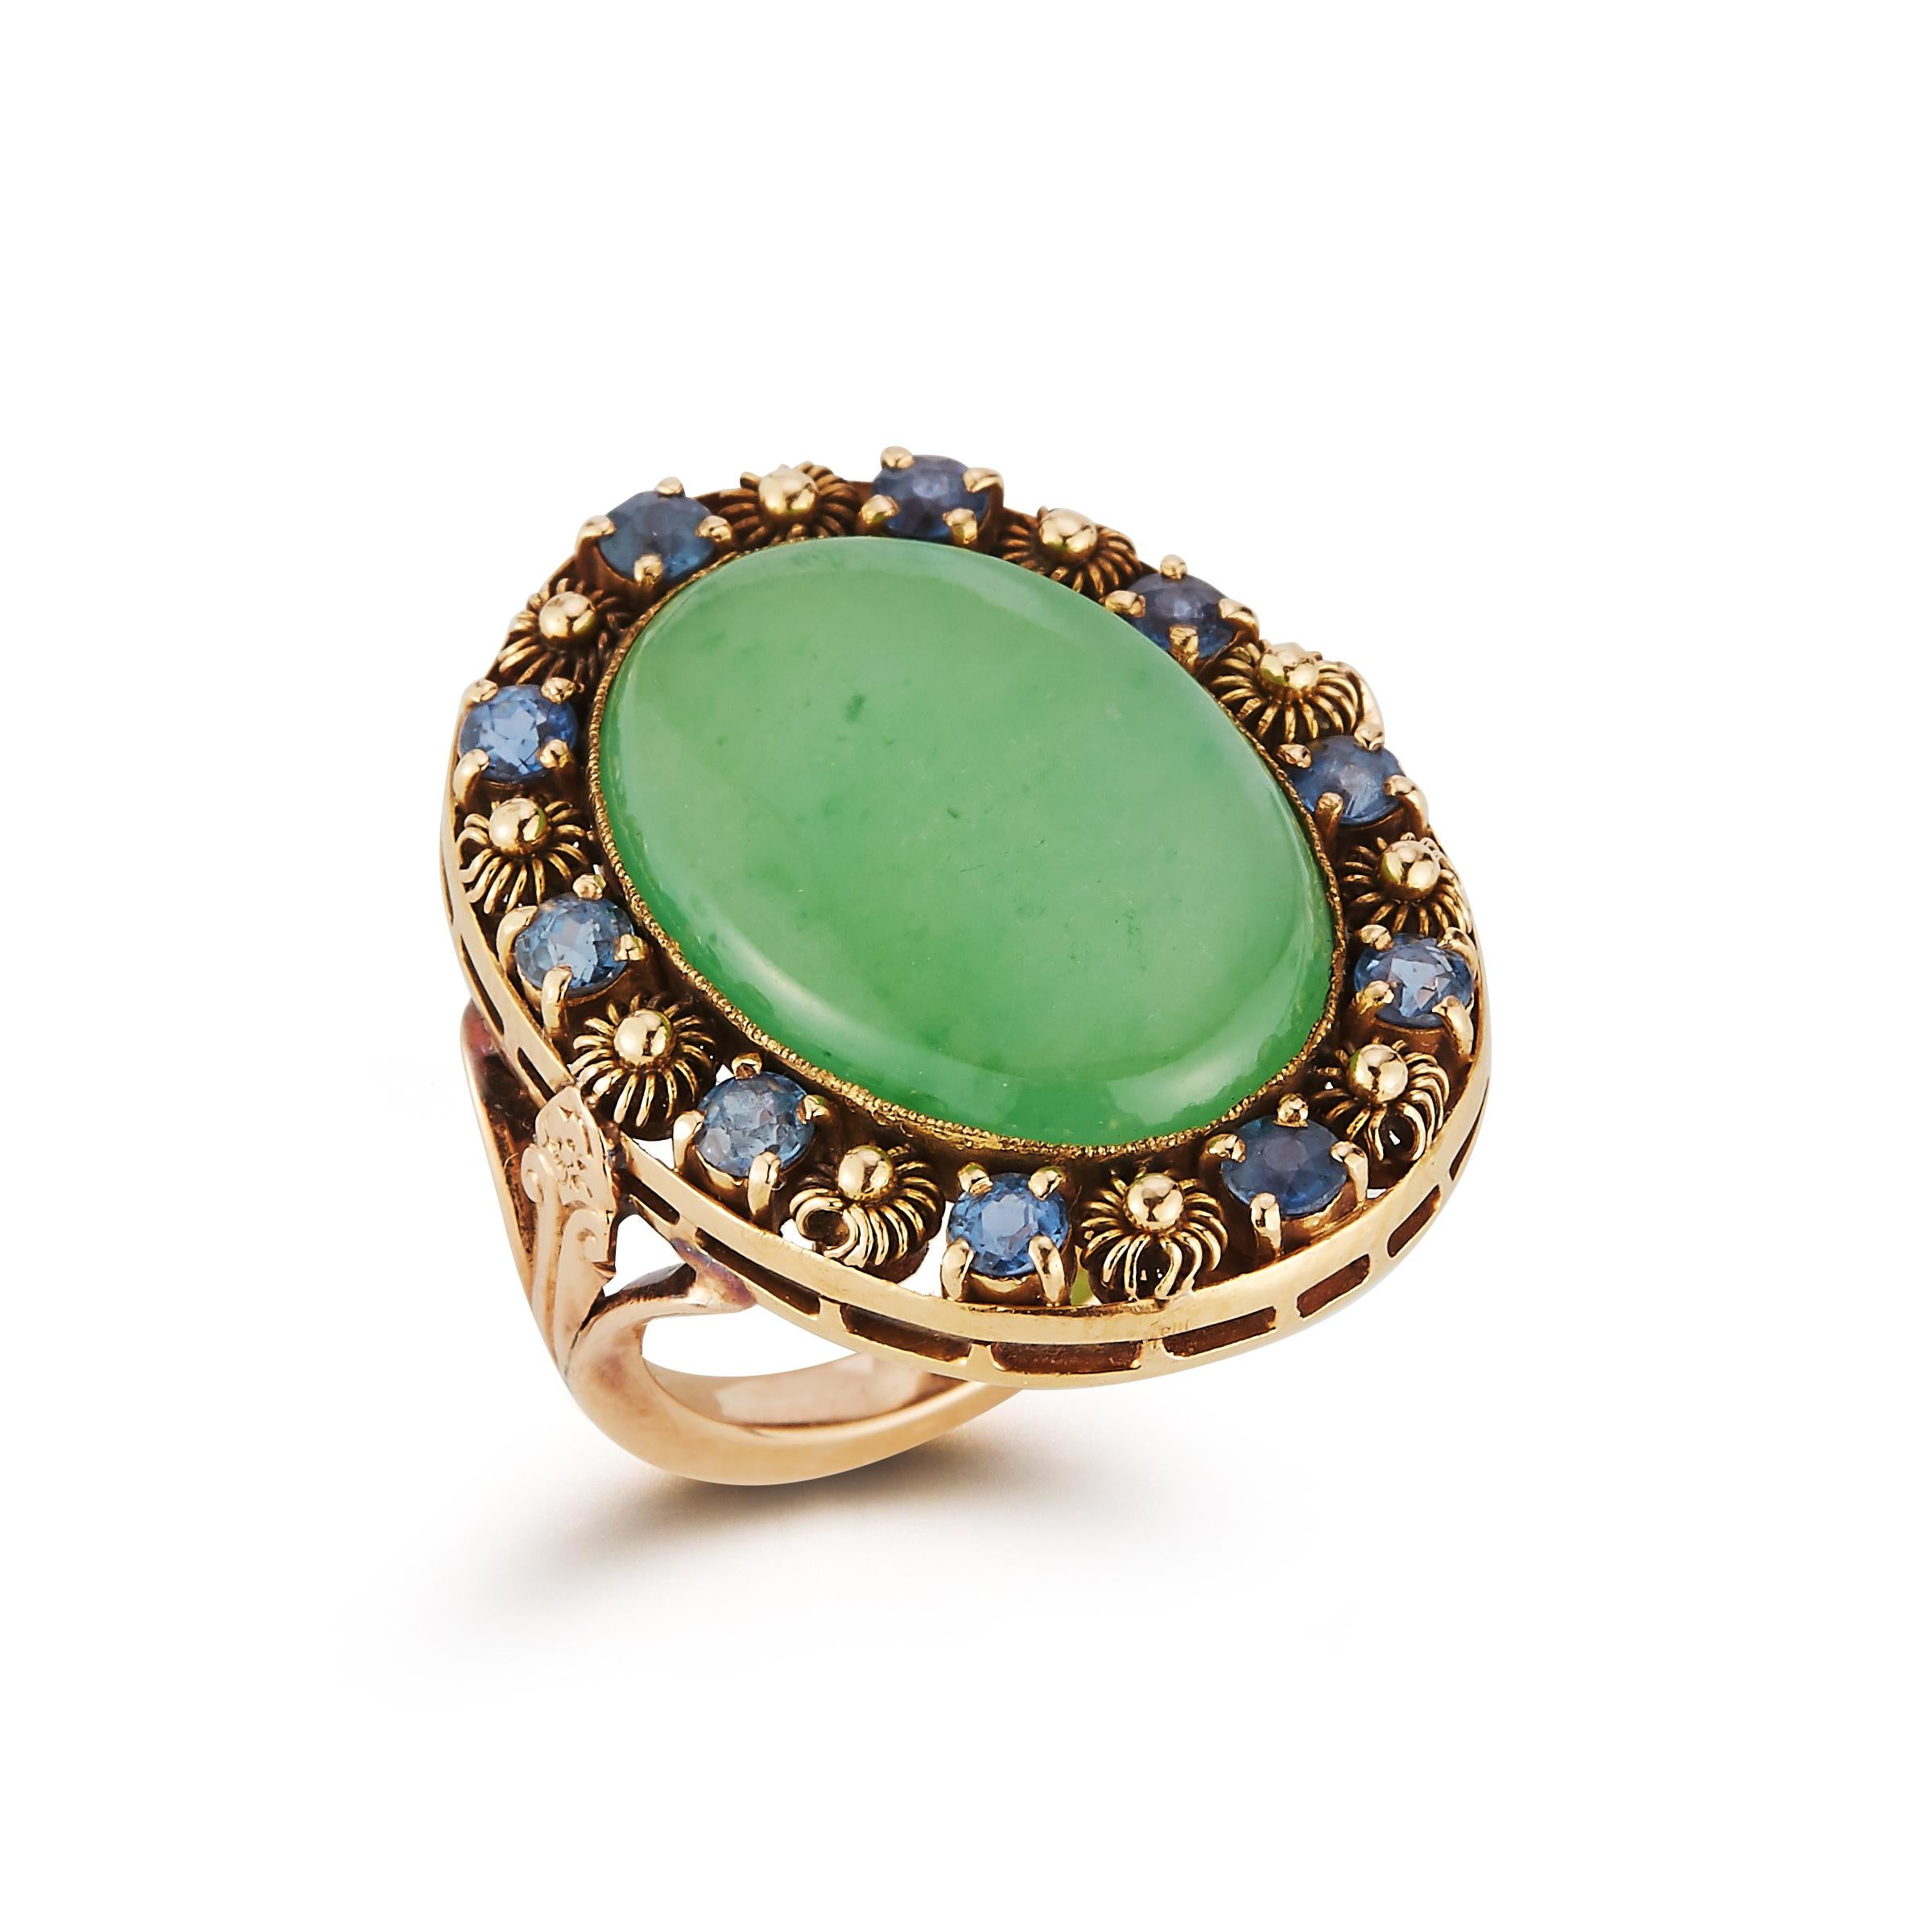 Art Nouveau Tiffany & Co Cabochon Jade & Sapphire Ring

Ring Size: 4.75

Signed, Tiffany & Co.

Gold Type: 18K Yellow Gold

From the legendary Louis Comfort Tiffany era